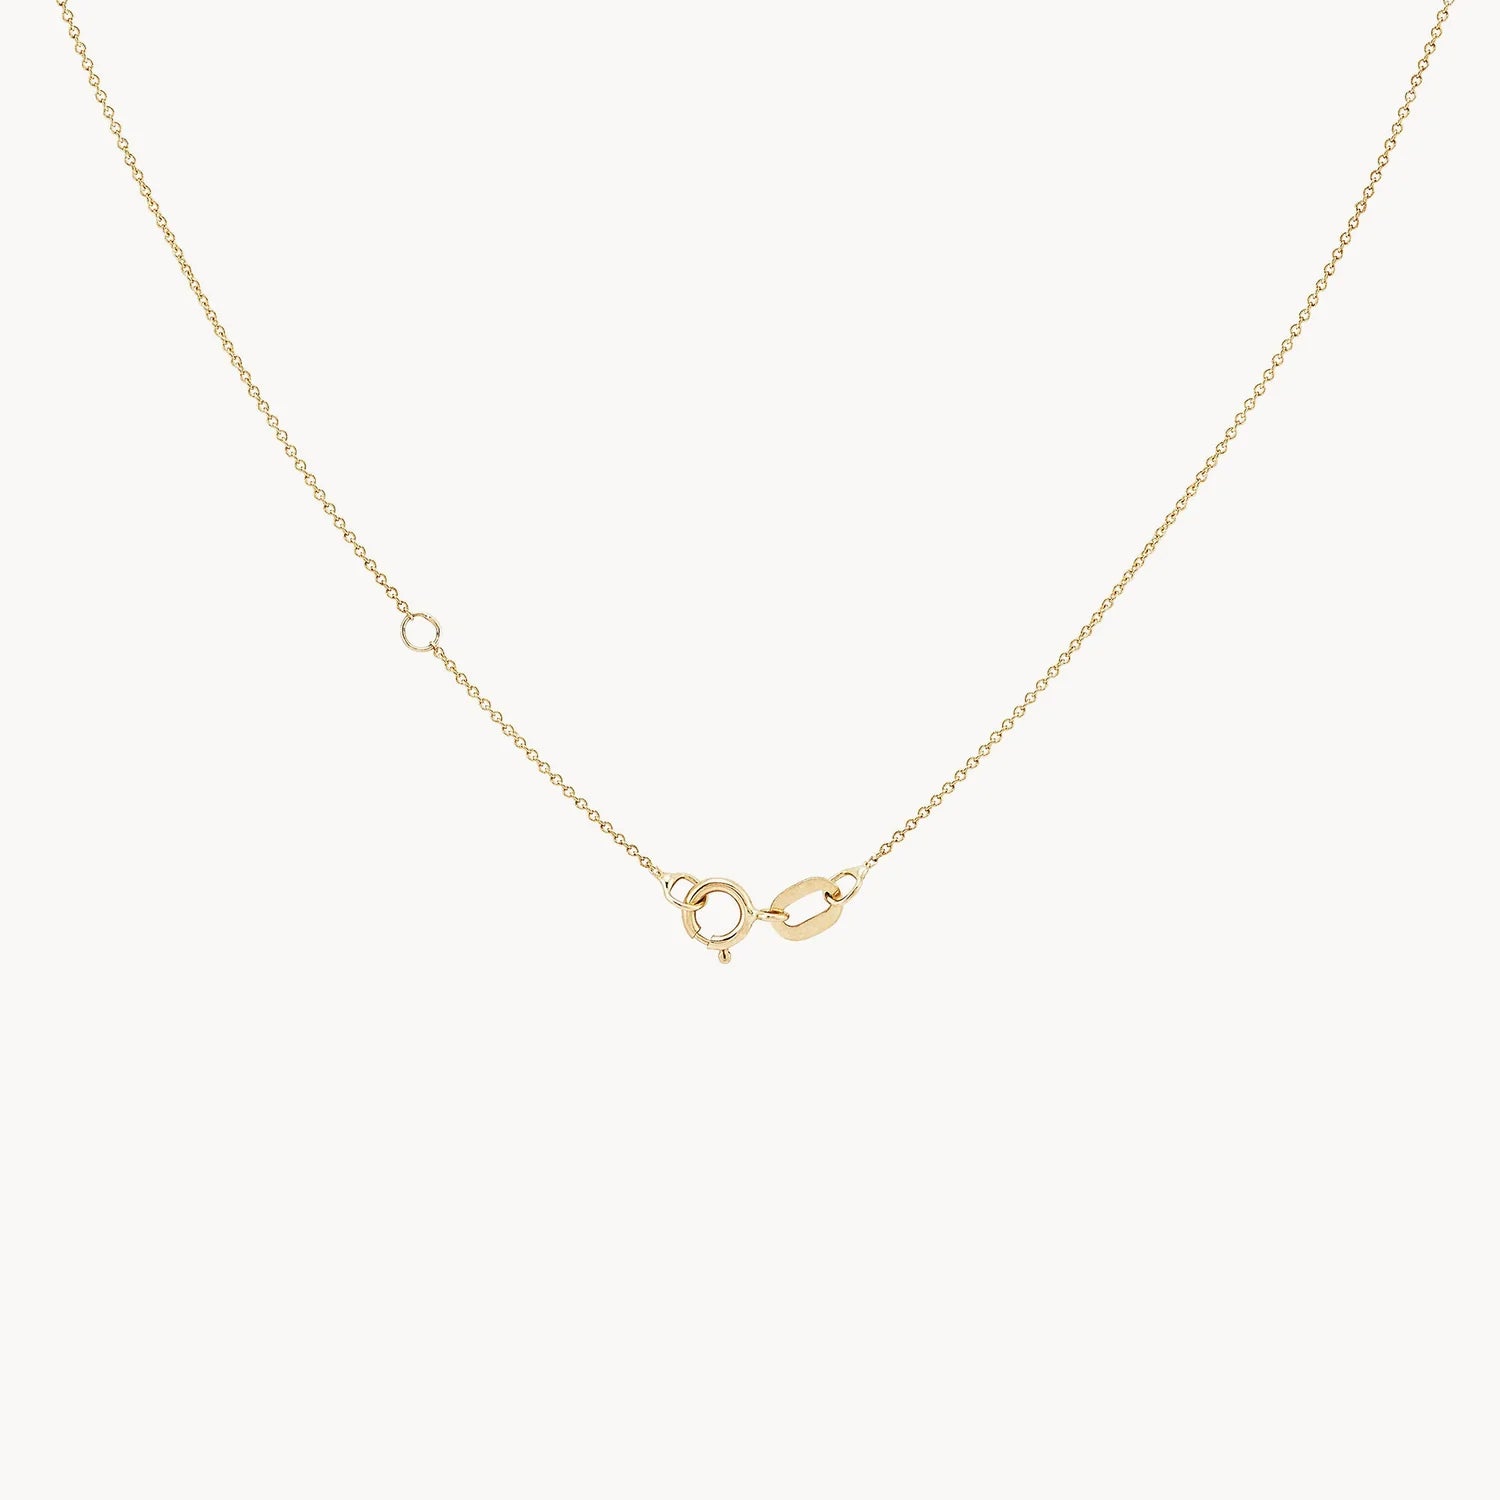 Love Lineage Necklace